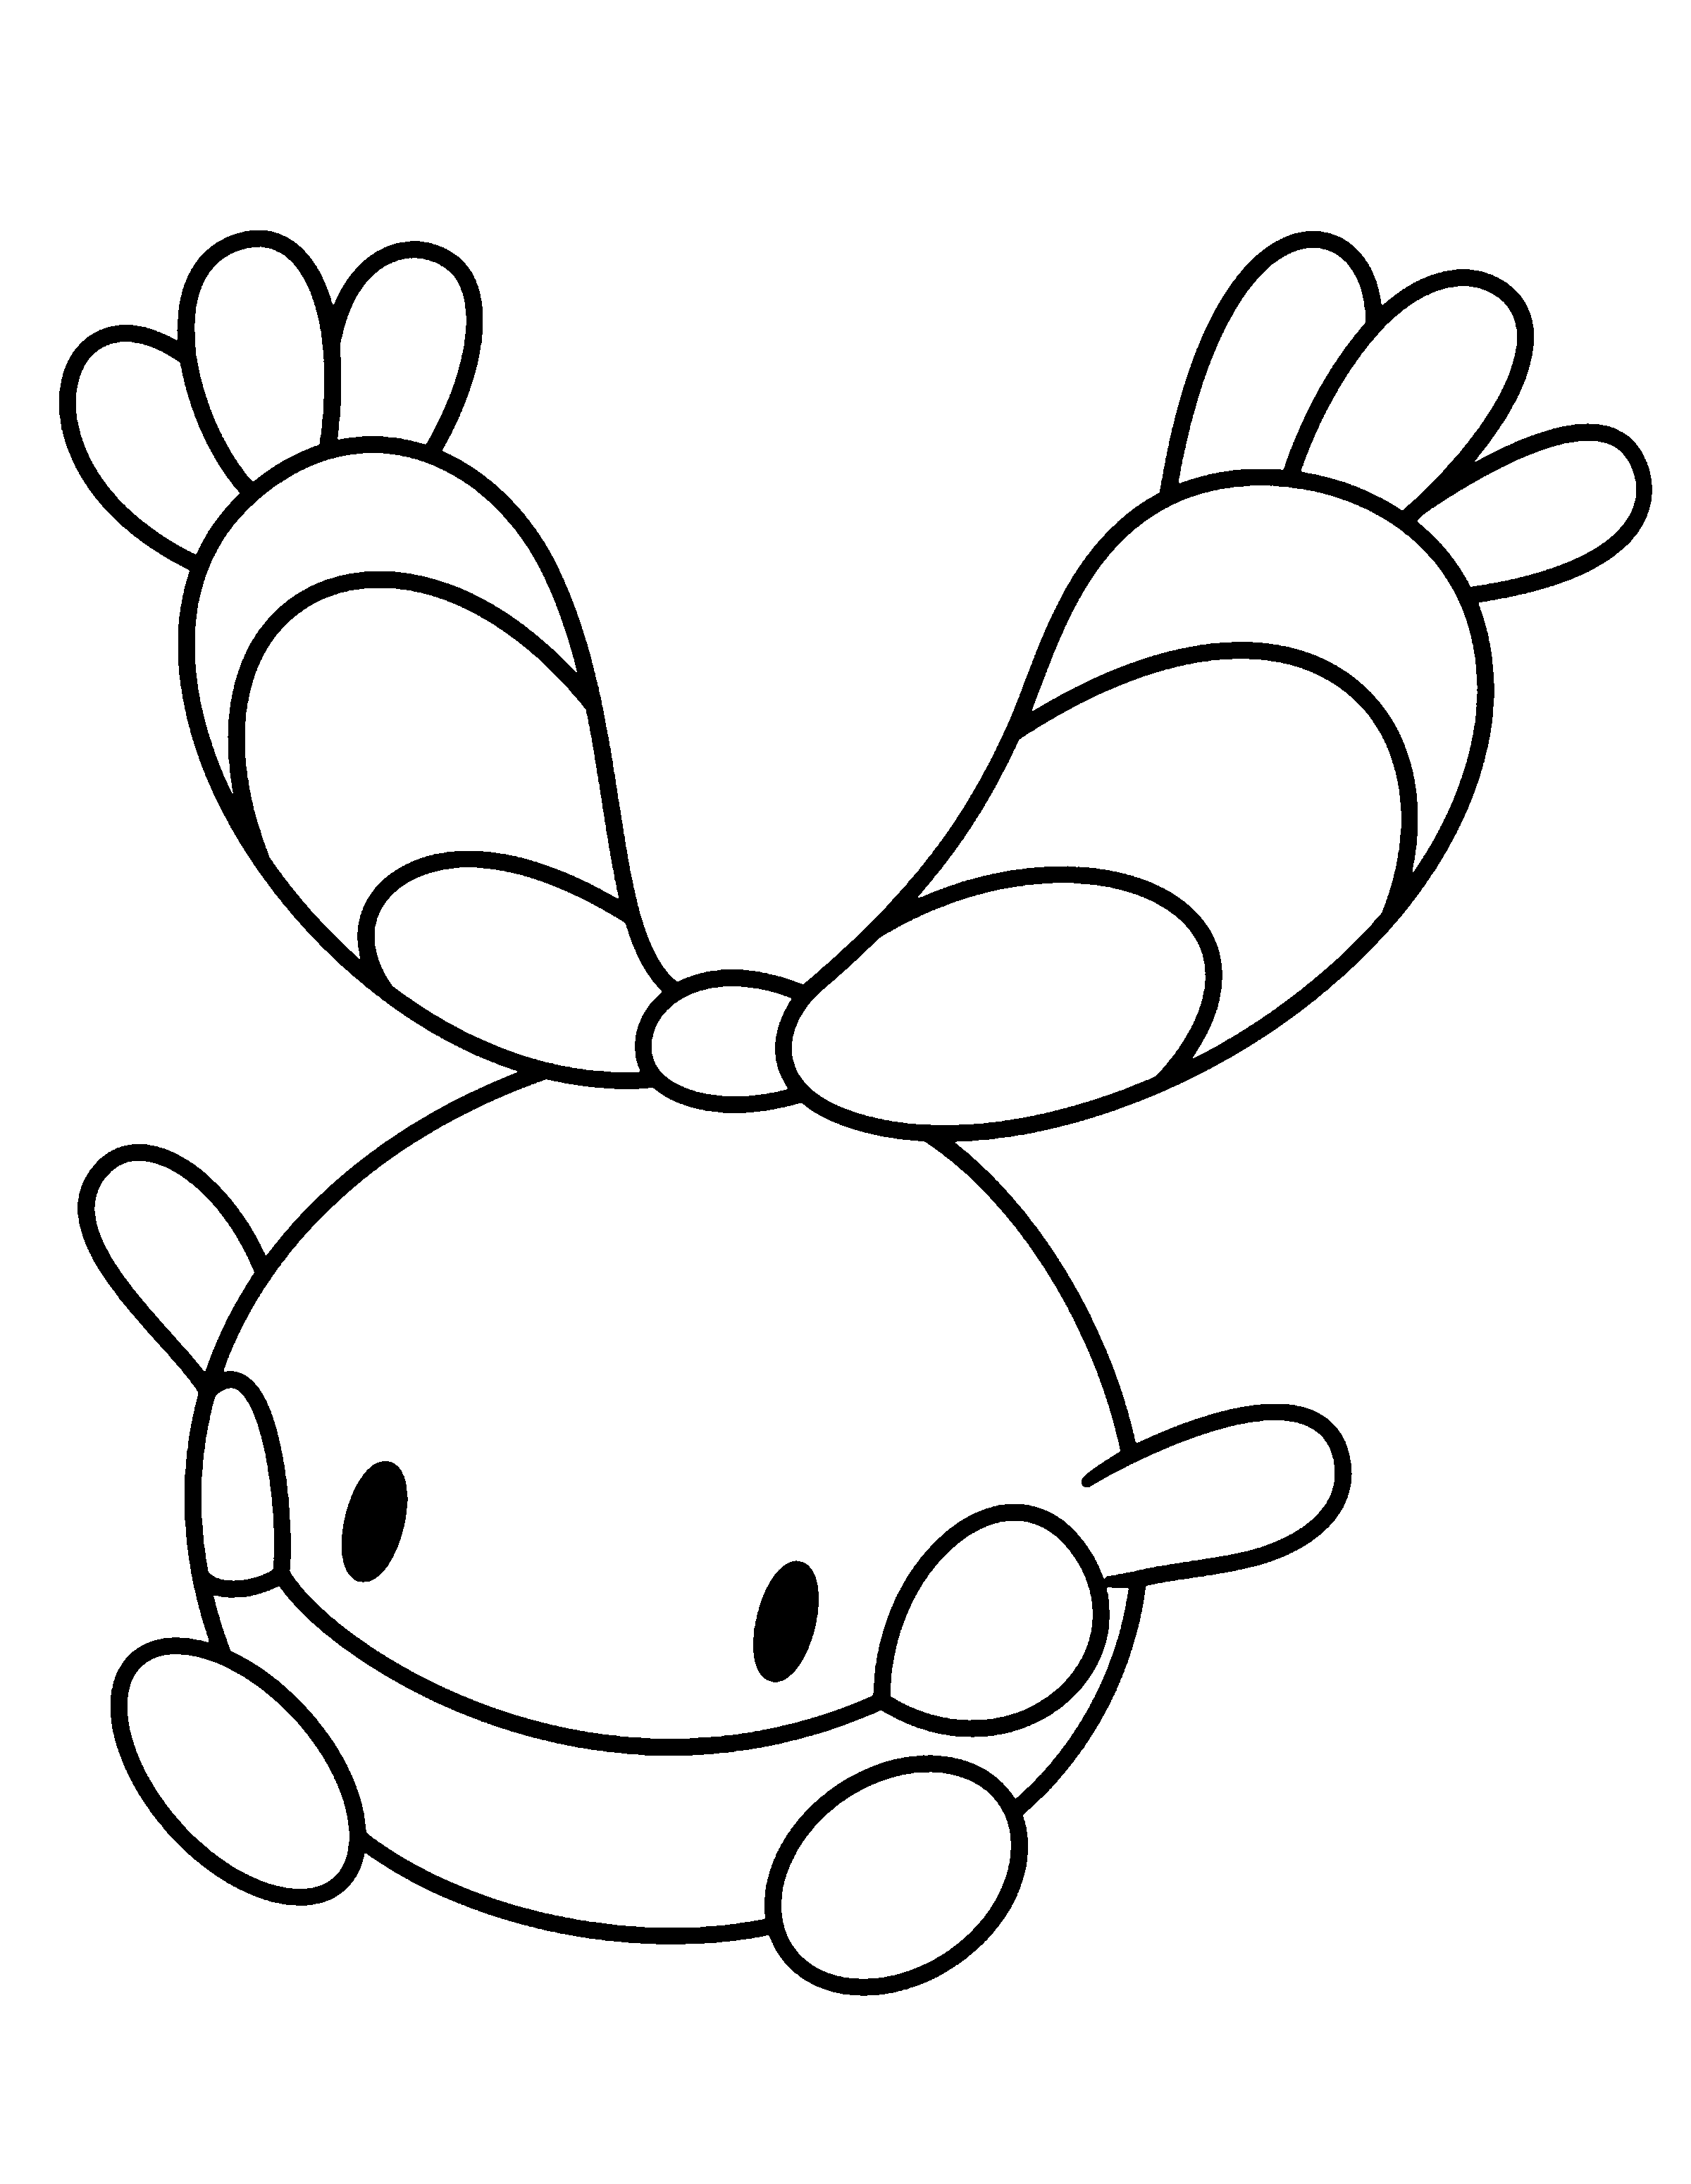 Pokemon diamond pearl Coloring Pages